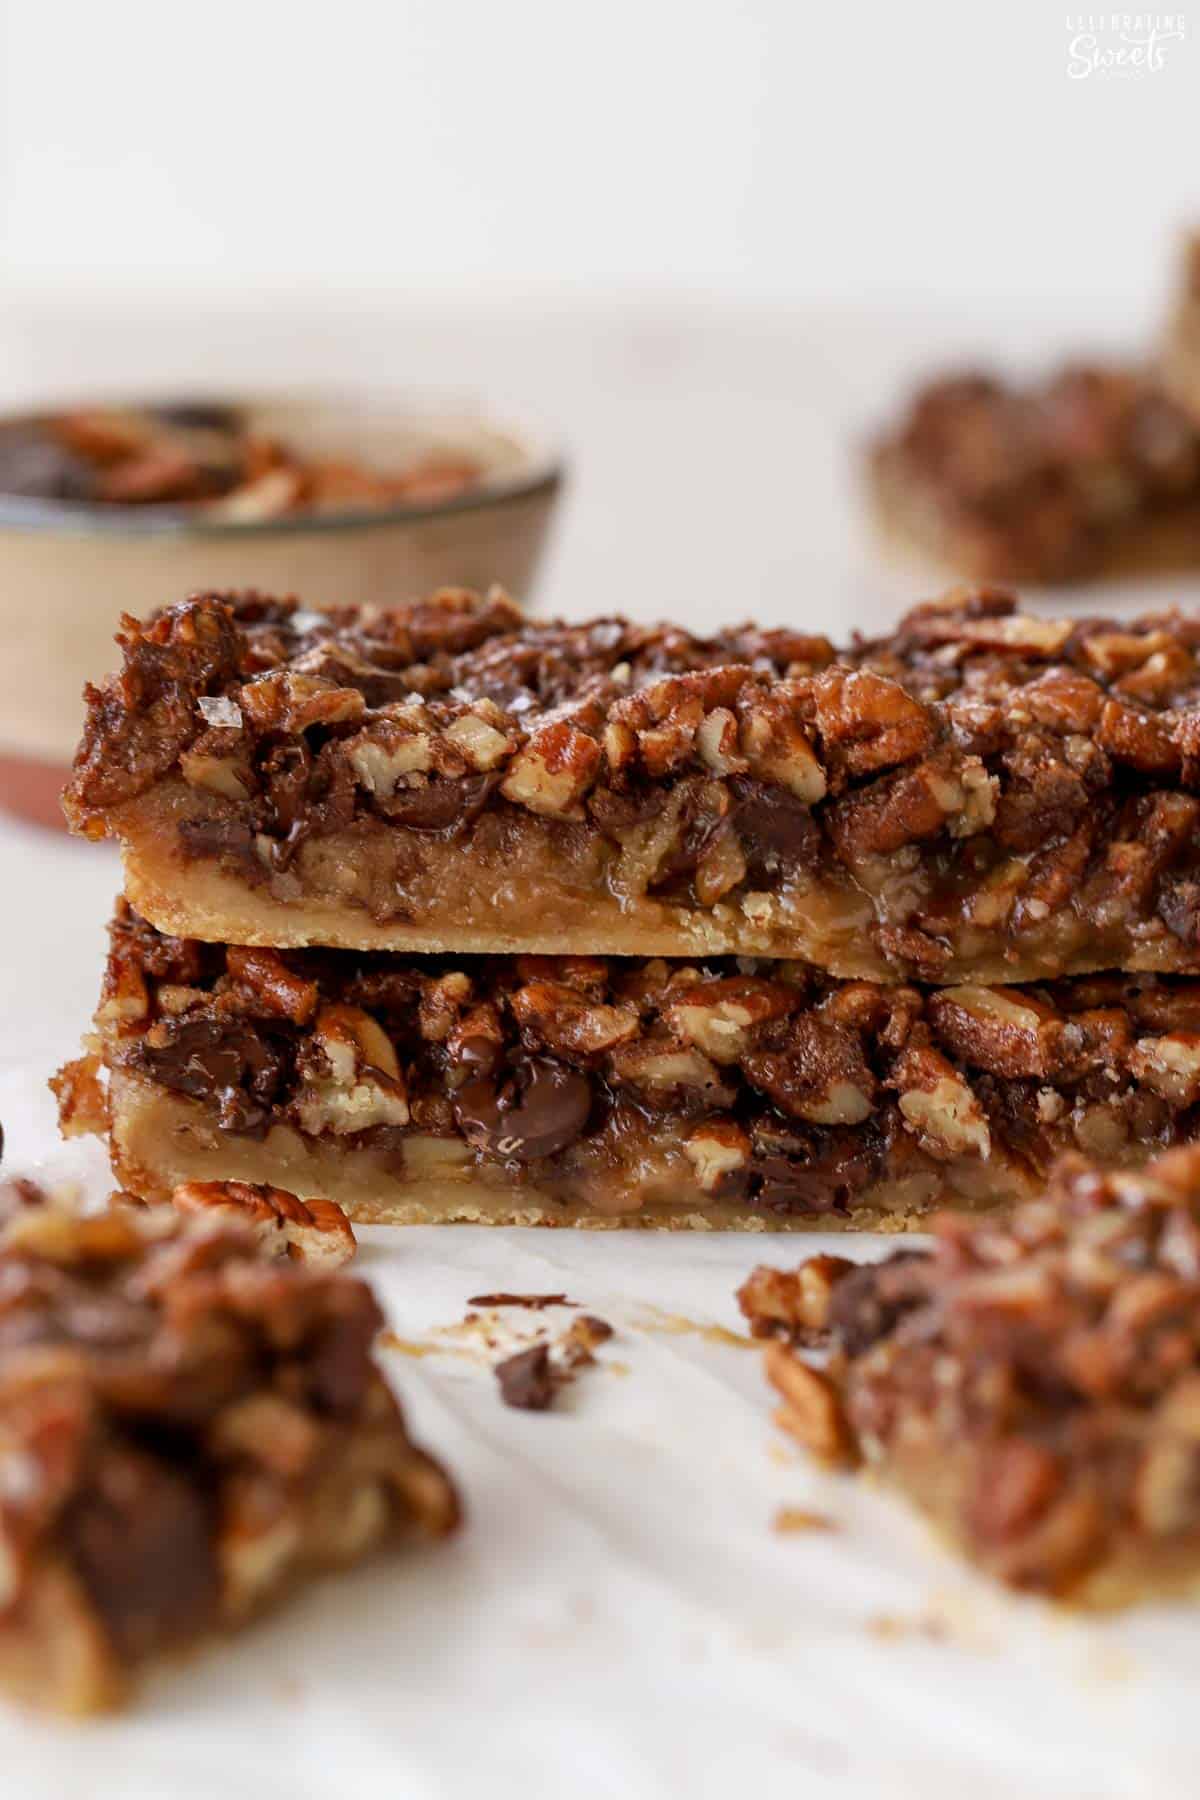 Stack of chocolate pecan bars on white parchment paper.